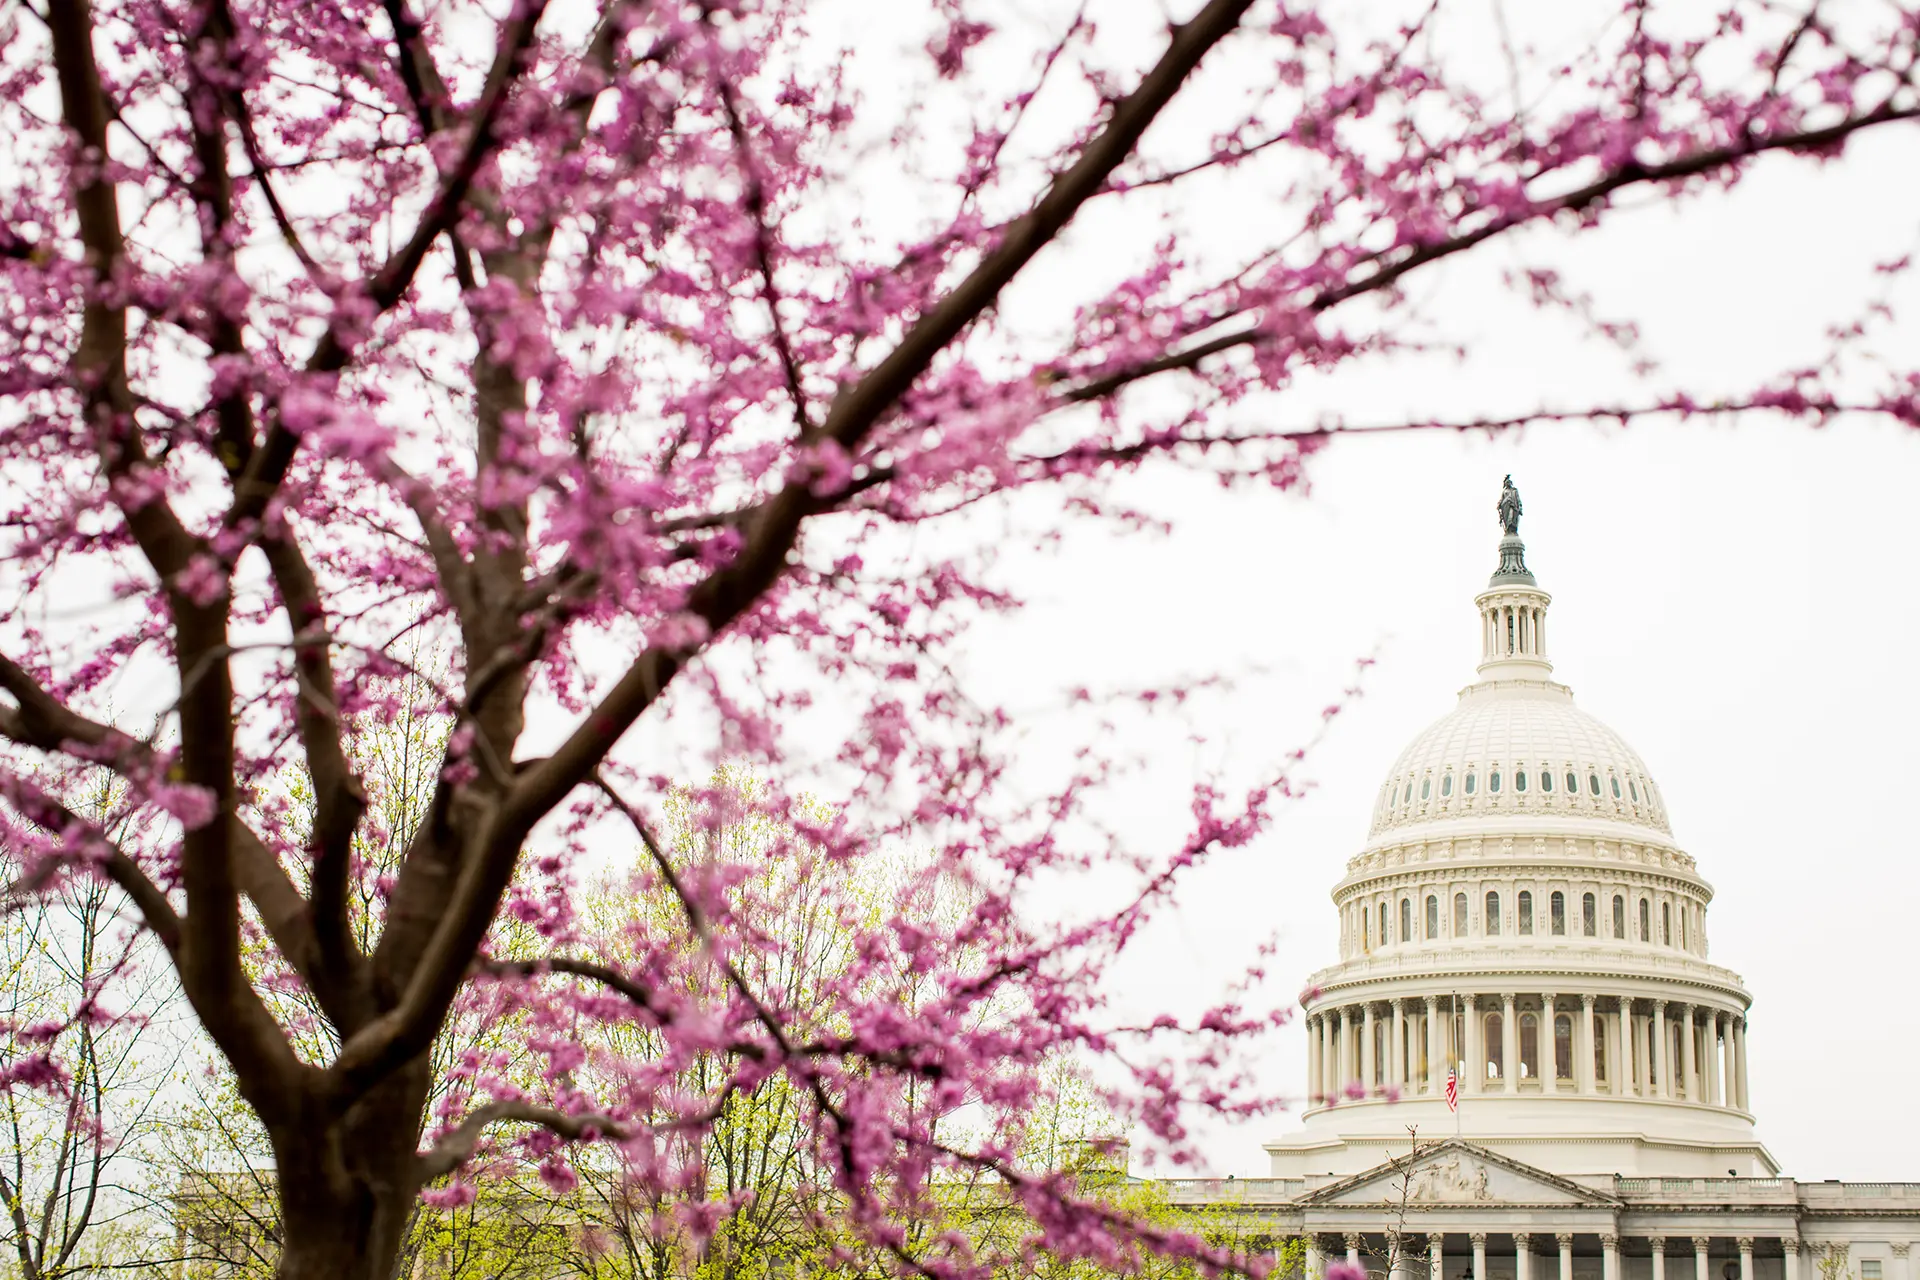 Spring blossoms at the US Capitol